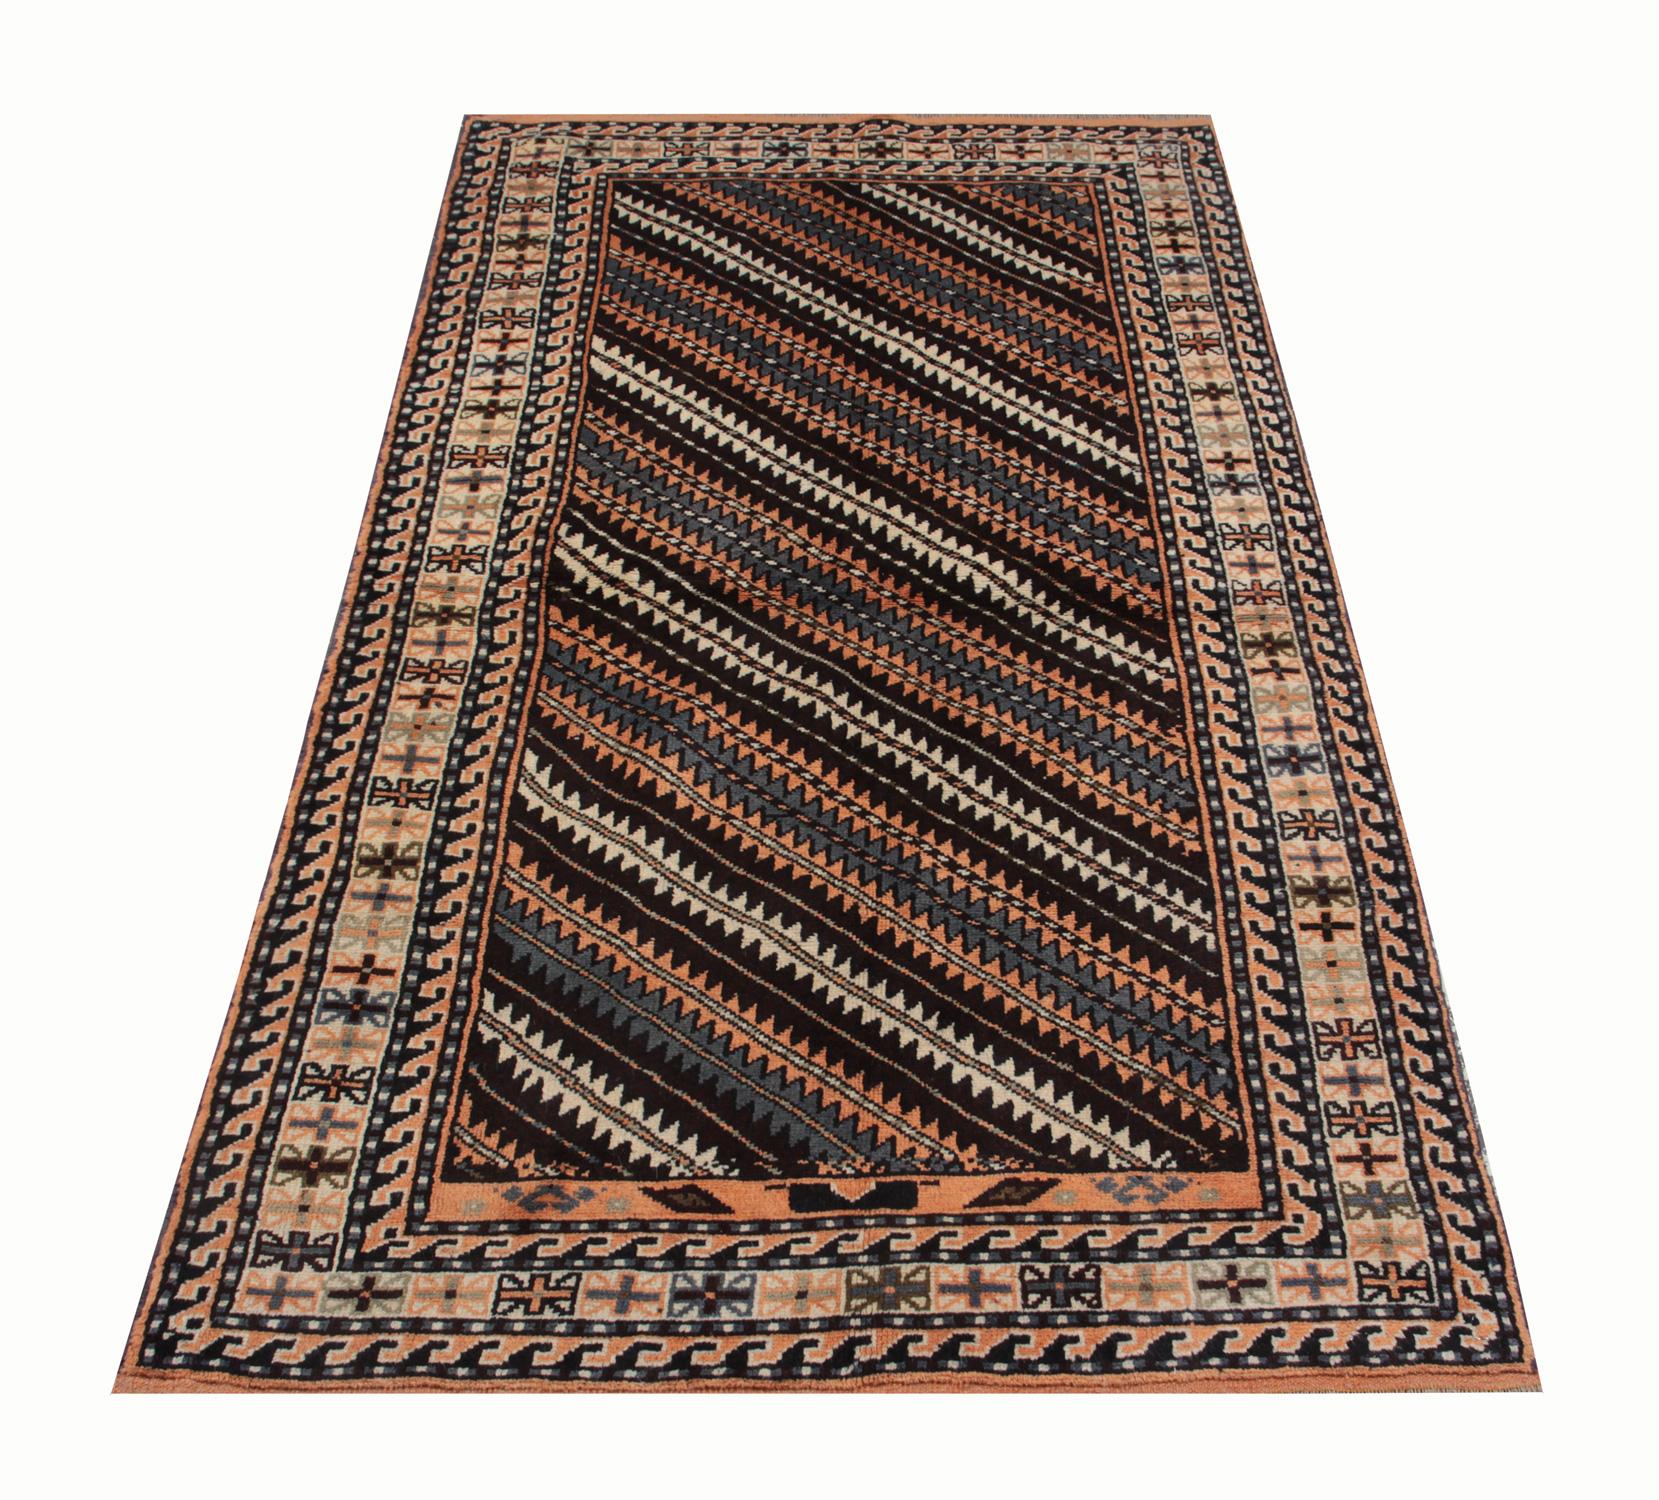 An excellent example of traditional Caucasian carpet rug weaving from the Shirvan region. Though these striped ground all-over design patterned rugs may seem like from a distance, but this woven rug has a great range of colors. This geometric rug